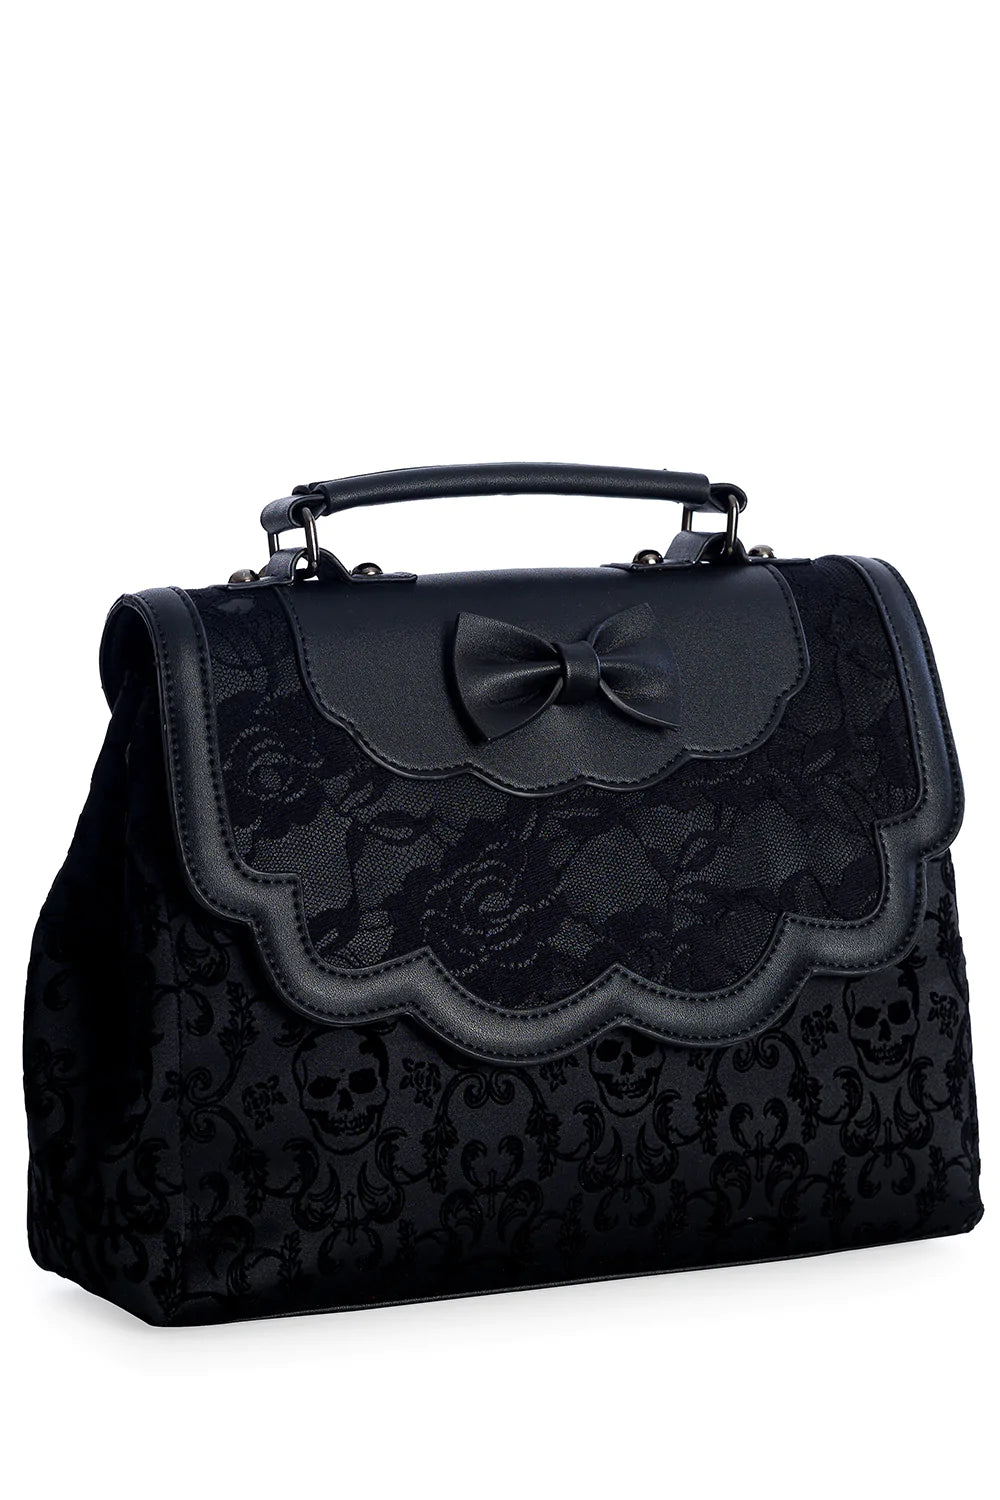 A black matte vinyl handbag with damask skull pattern body and a scalloped front flap with a bow and black lace detailing. The bag has a black matte vinyl hand strap and a gunmetal chain shoulder strap.